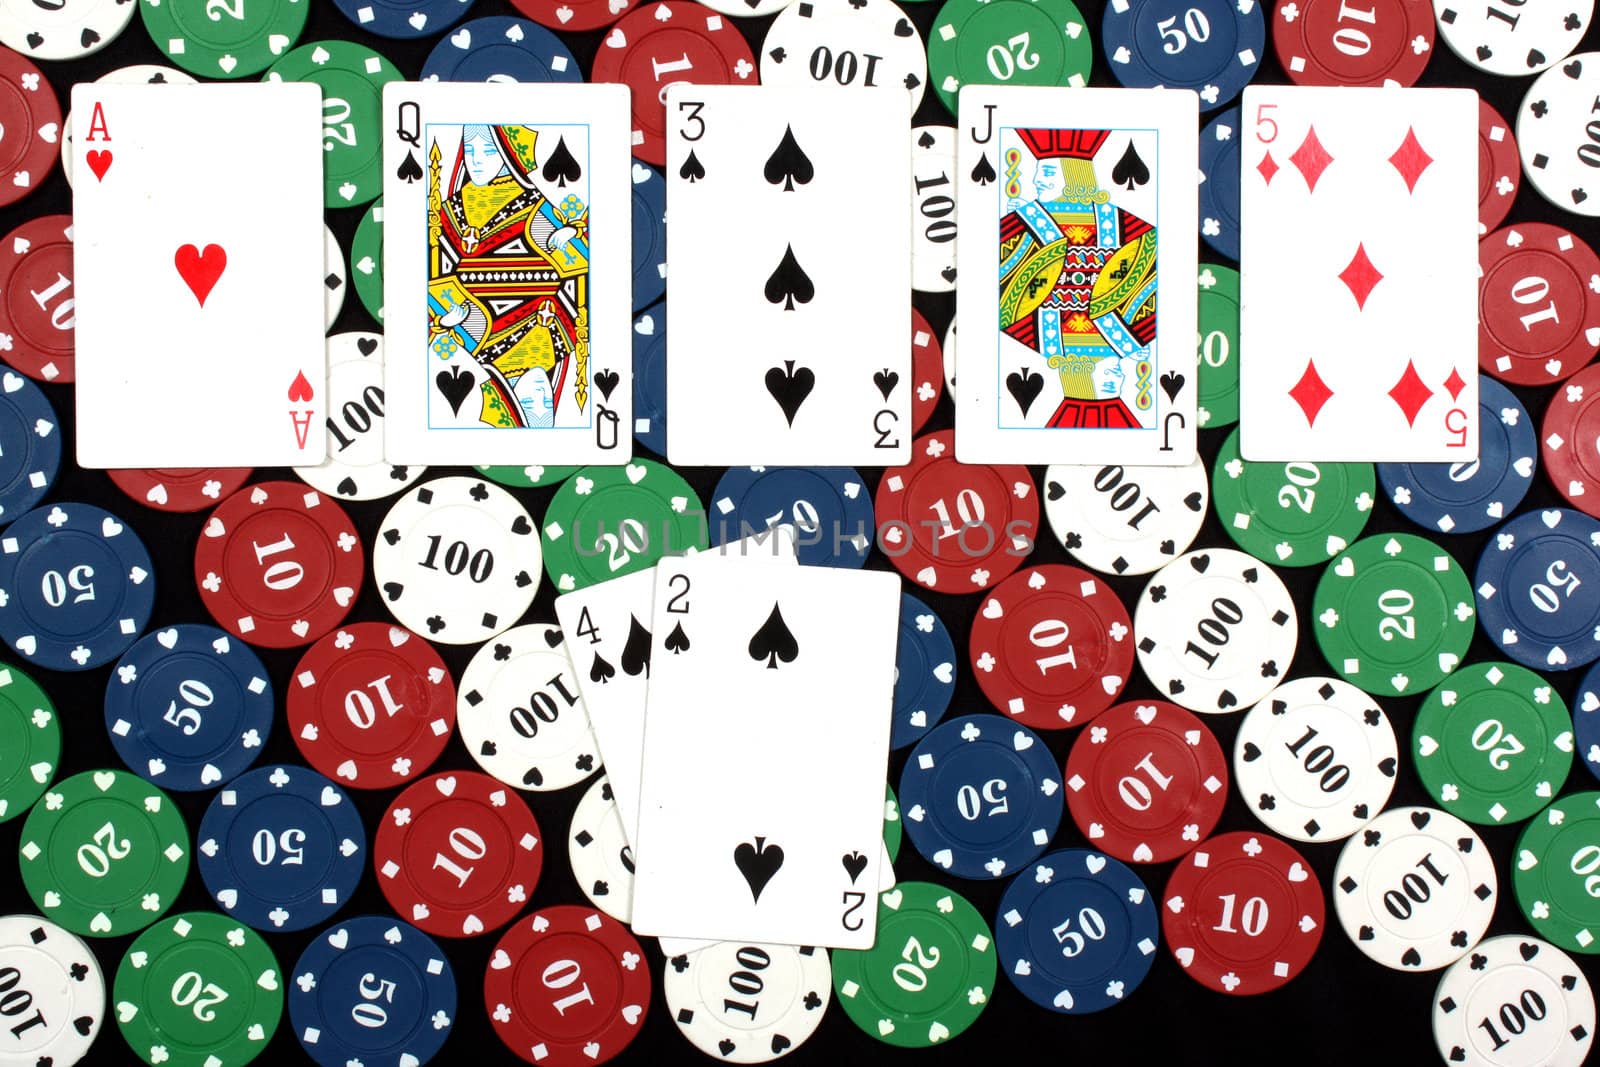 A winning hand of poker called flush containing 5 cards of the same deck (spades in this case), on colorful gambling chips.